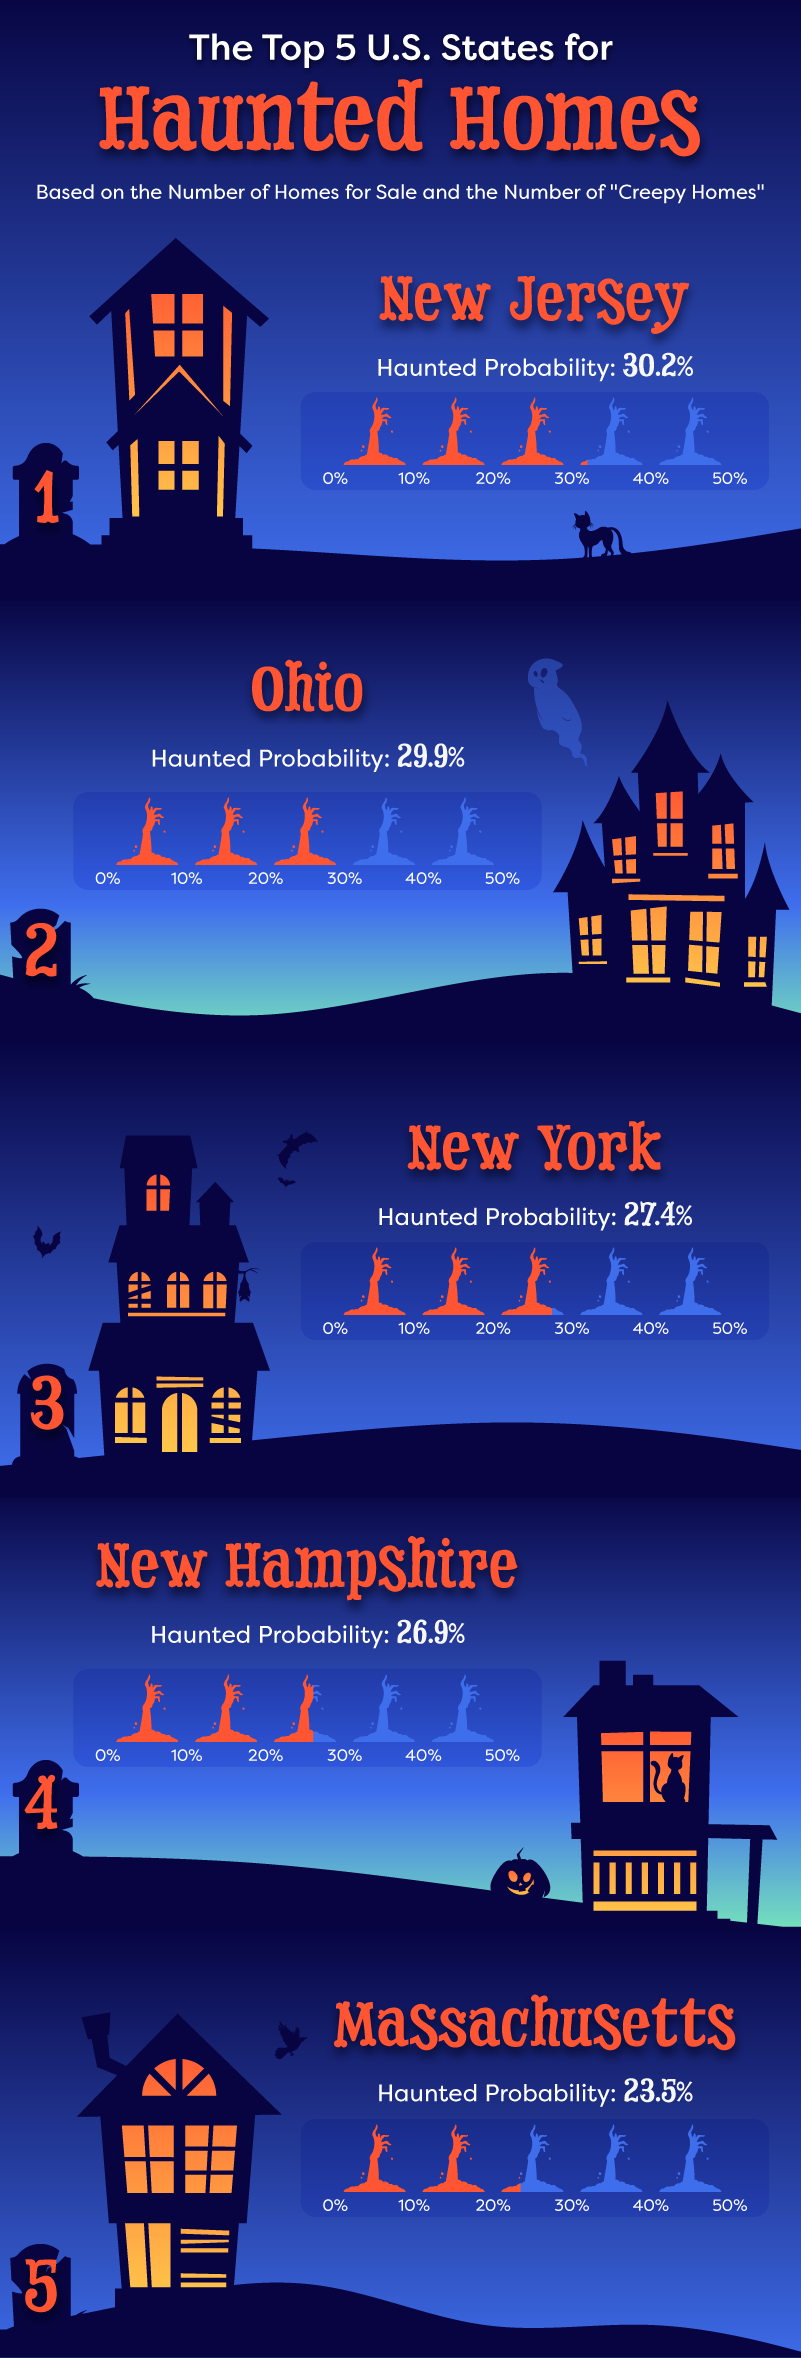 Graphic showing the top 5 U.S. states for haunted homes.